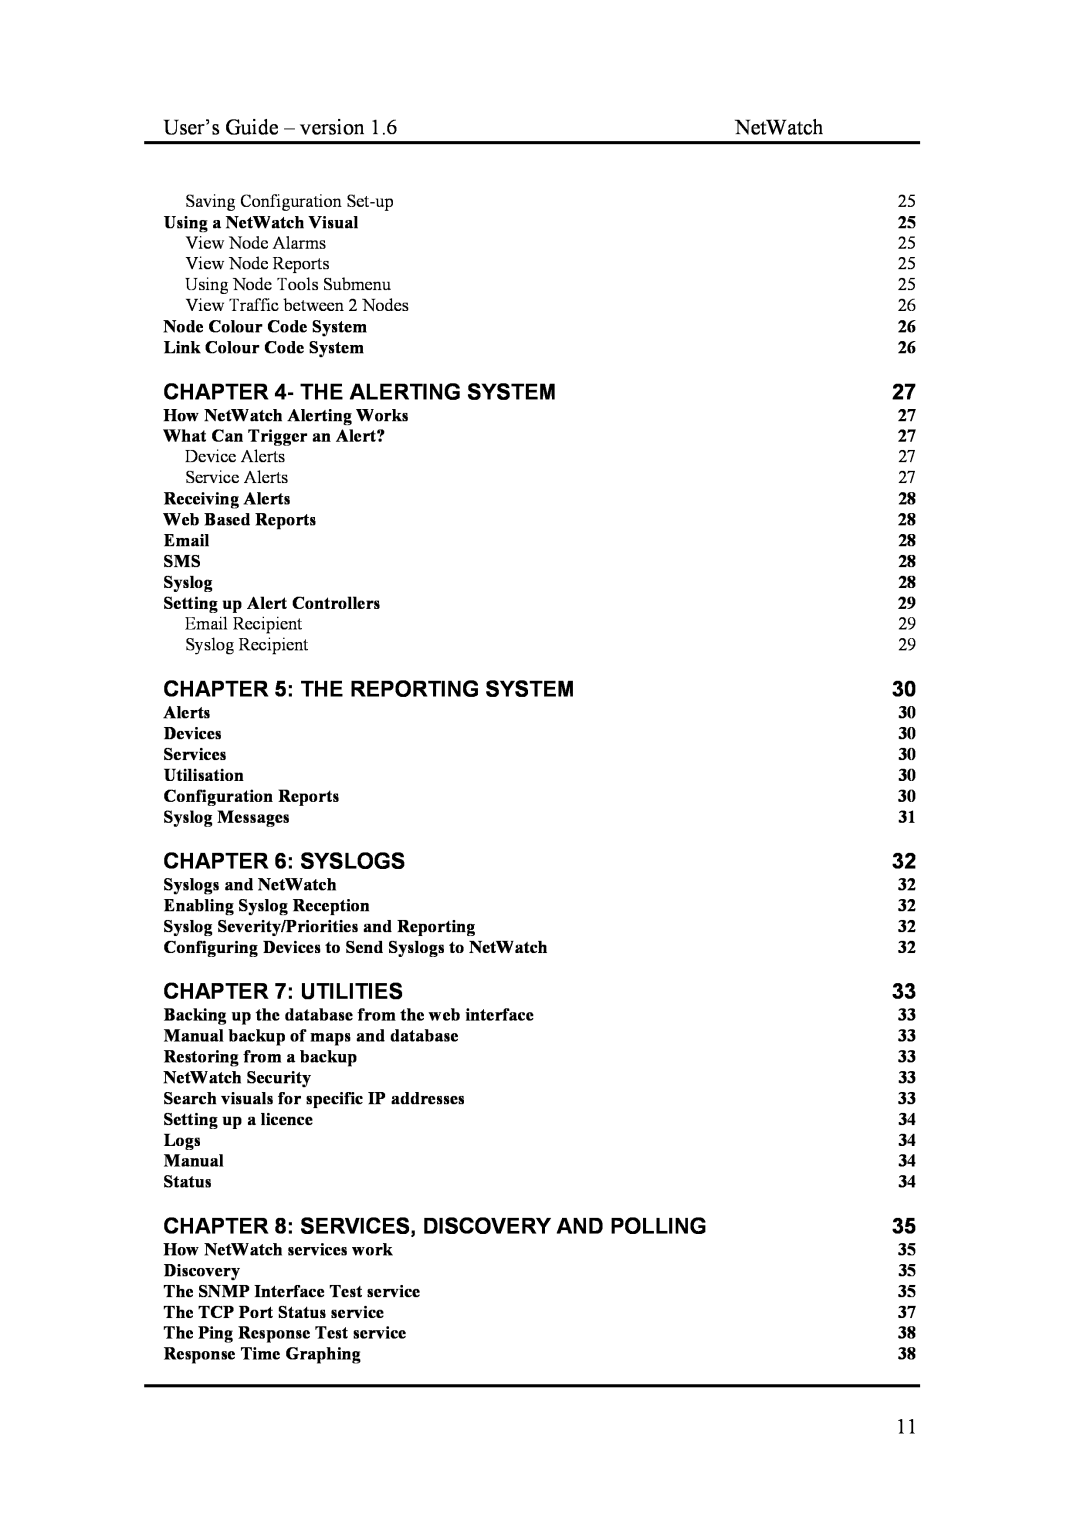 Fluke Network Router manual The Alerting System, The Reporting System, Syslogs, Utilities, Services, Discovery And Polling 